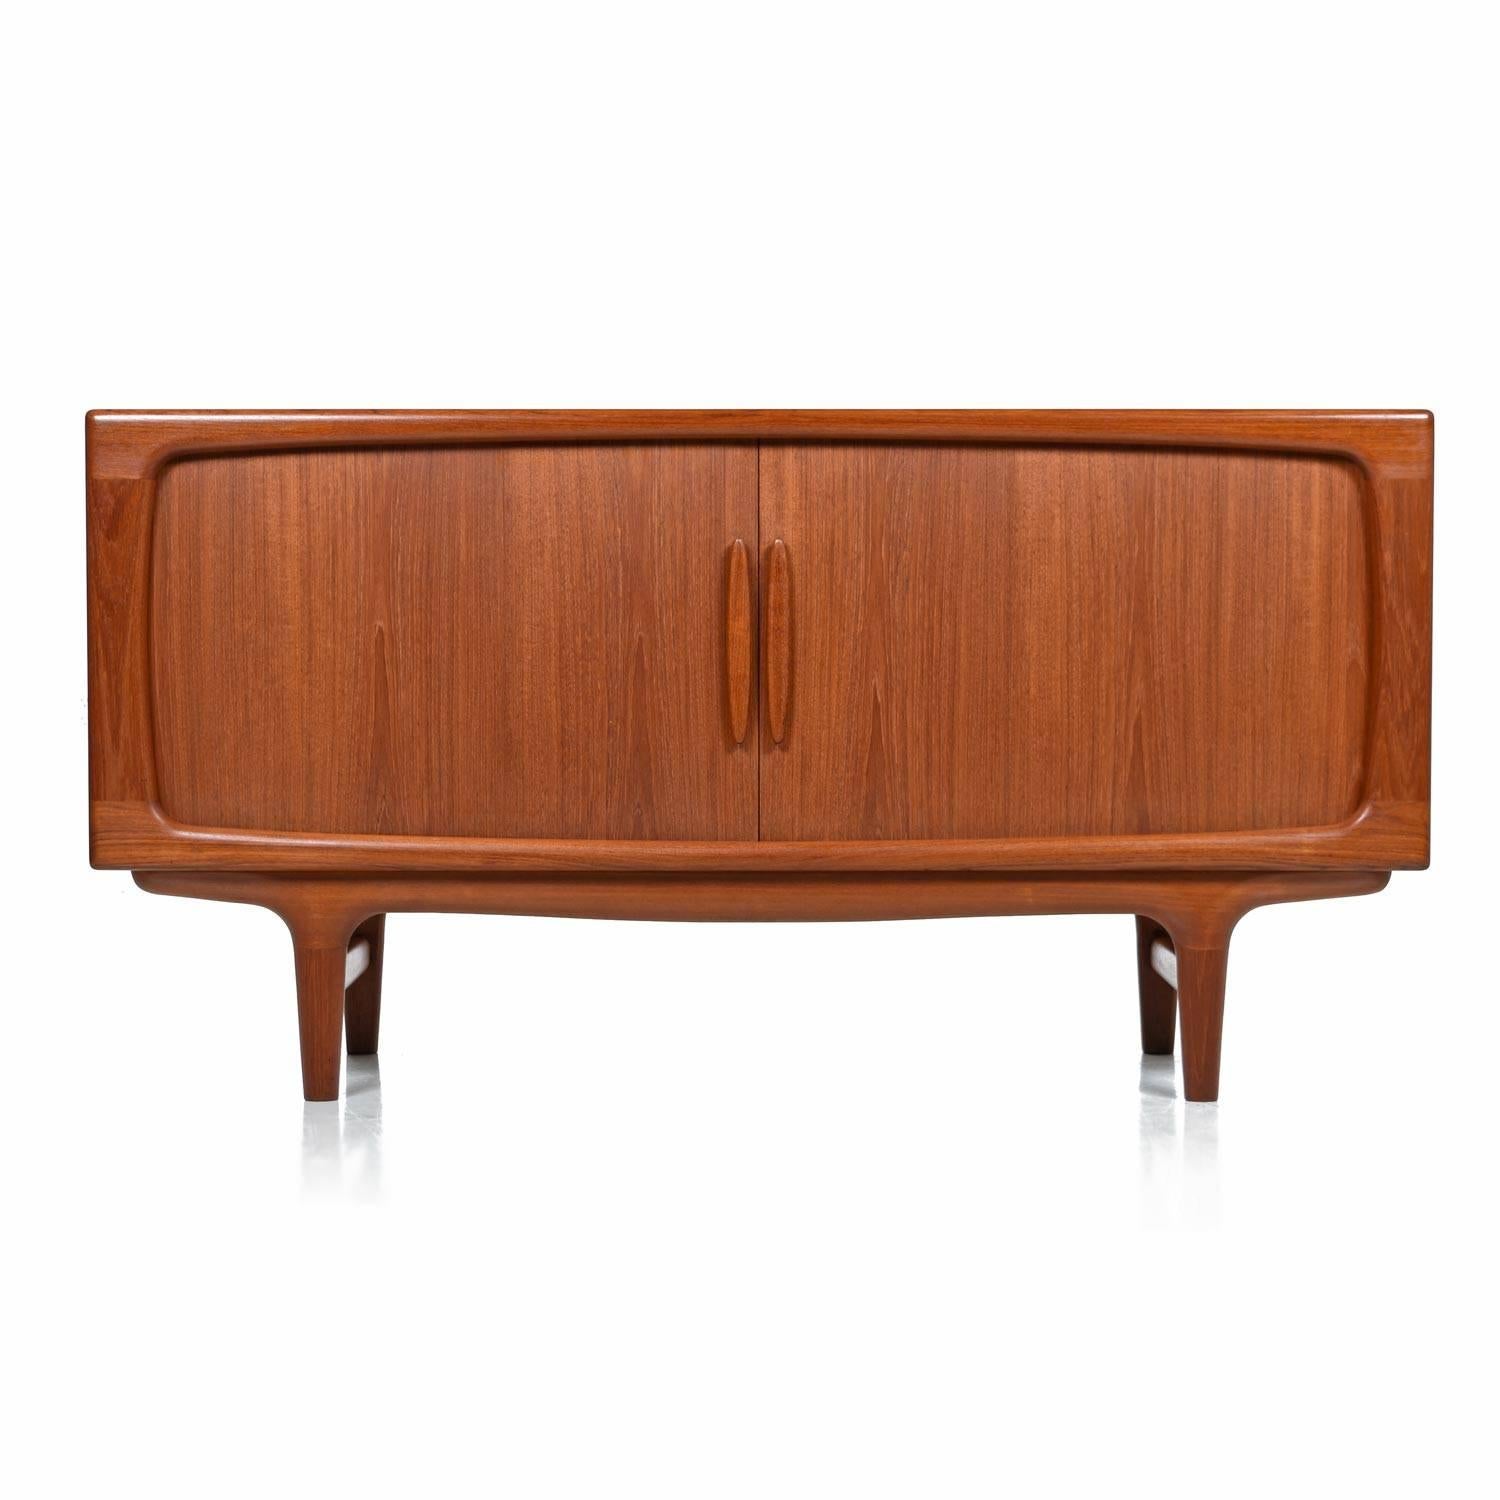 Restored vintage Danish teak credenza made by Dyrlund in Denmark, 1970s. Masterfully crafted with seamlessly pleated tambour doors along the facade. Slide the doors to reveal adjustable shelf cabinet space and four pull out drawers. Sideboards like